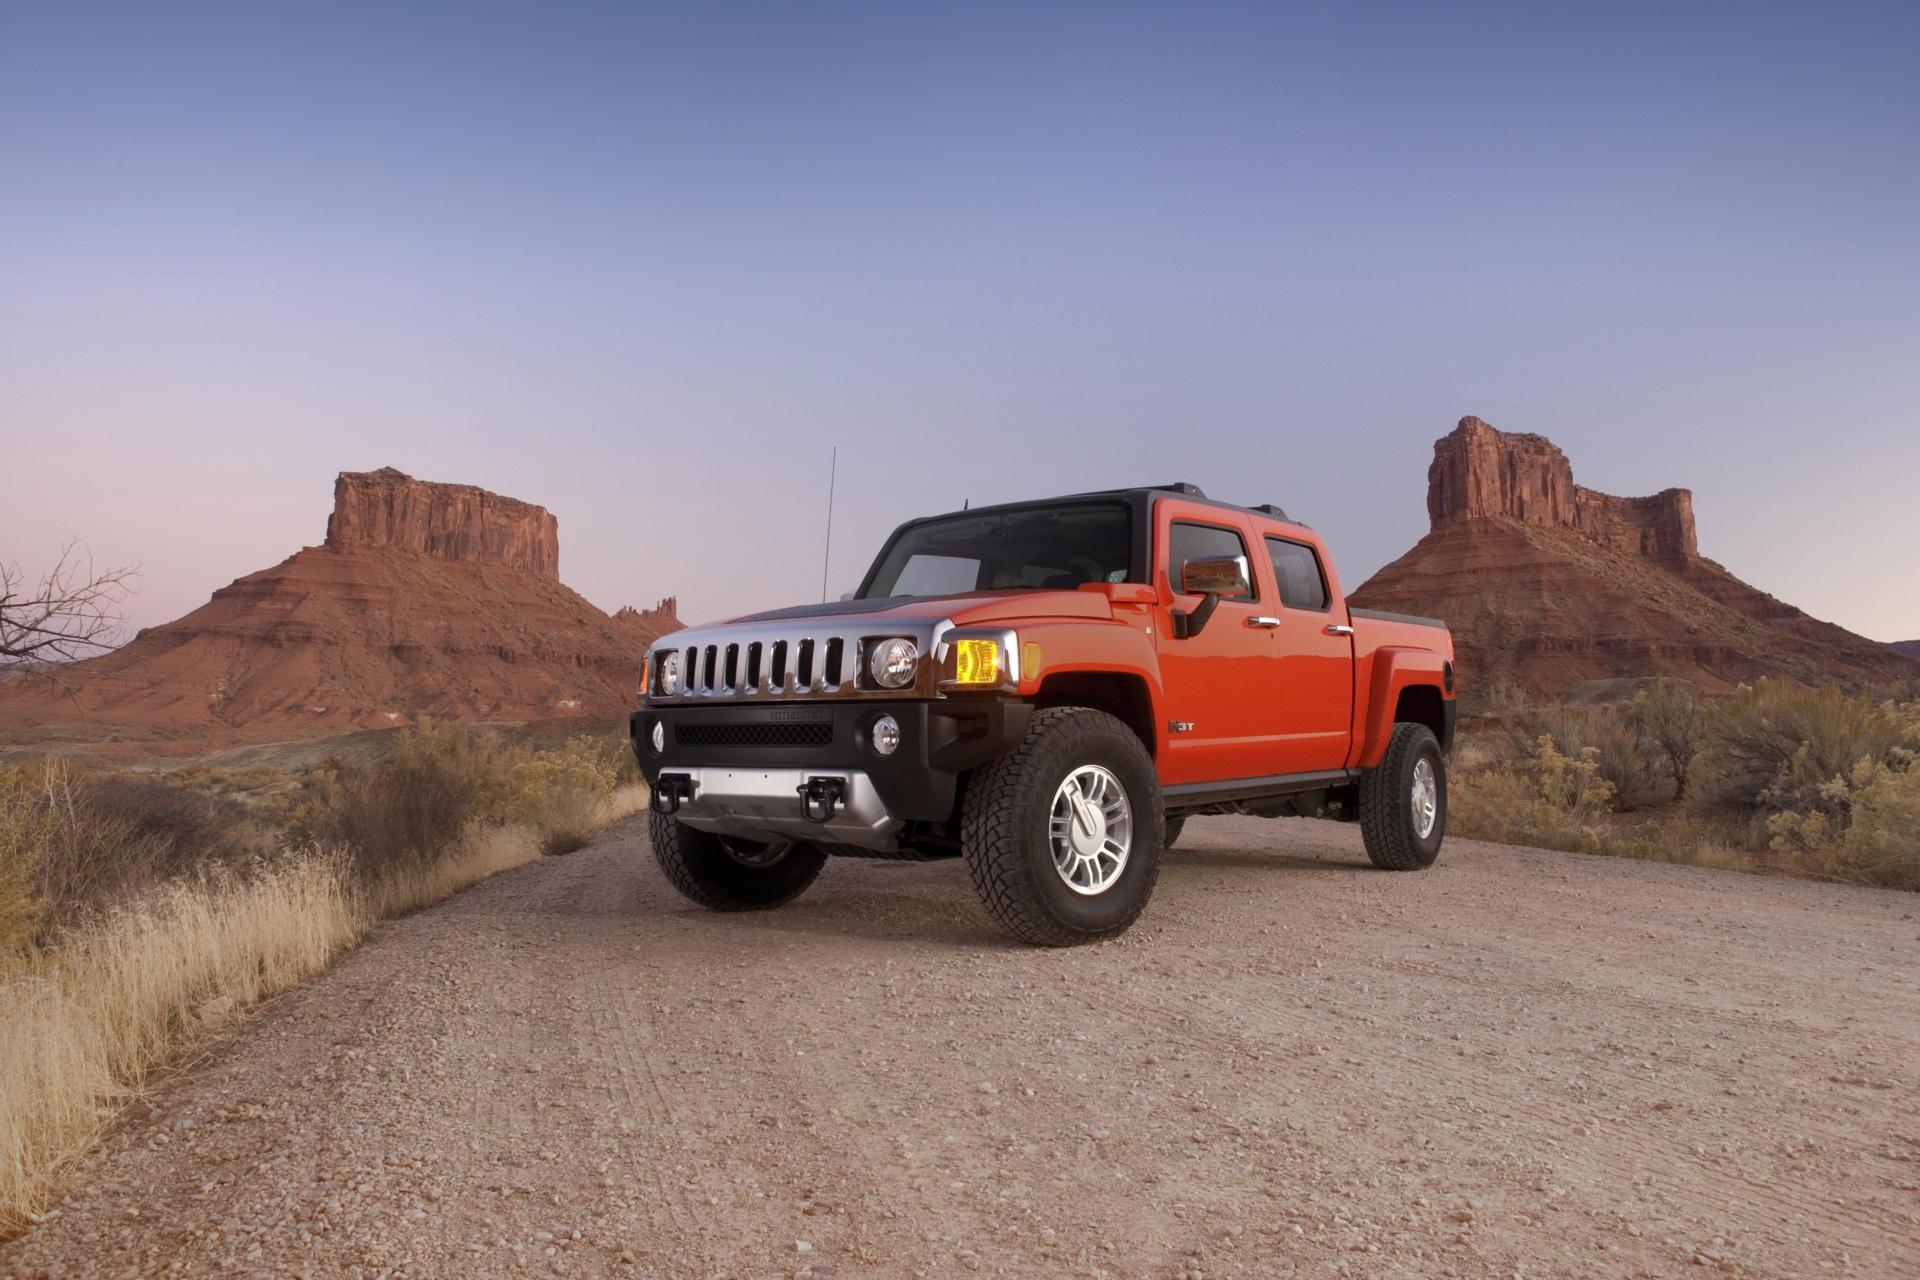 Hummer H3T Concept Wallpapers